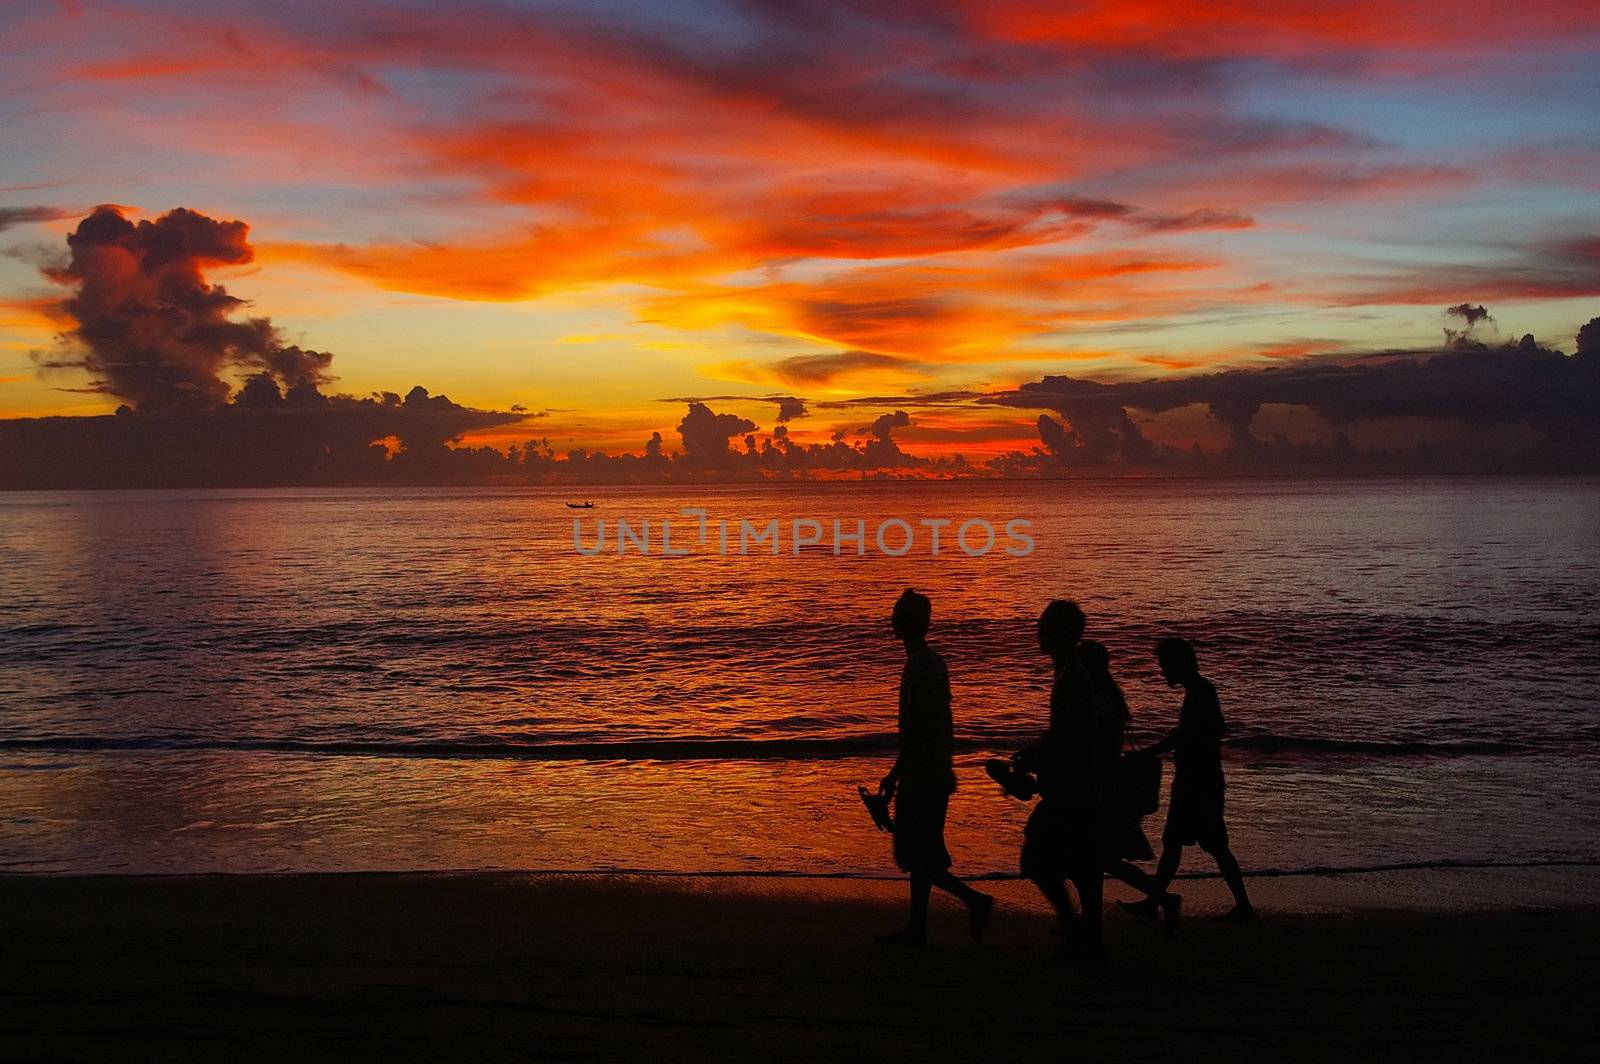 Young men walking on the beach at sunset, Dreamland, Bali, Indonesia.